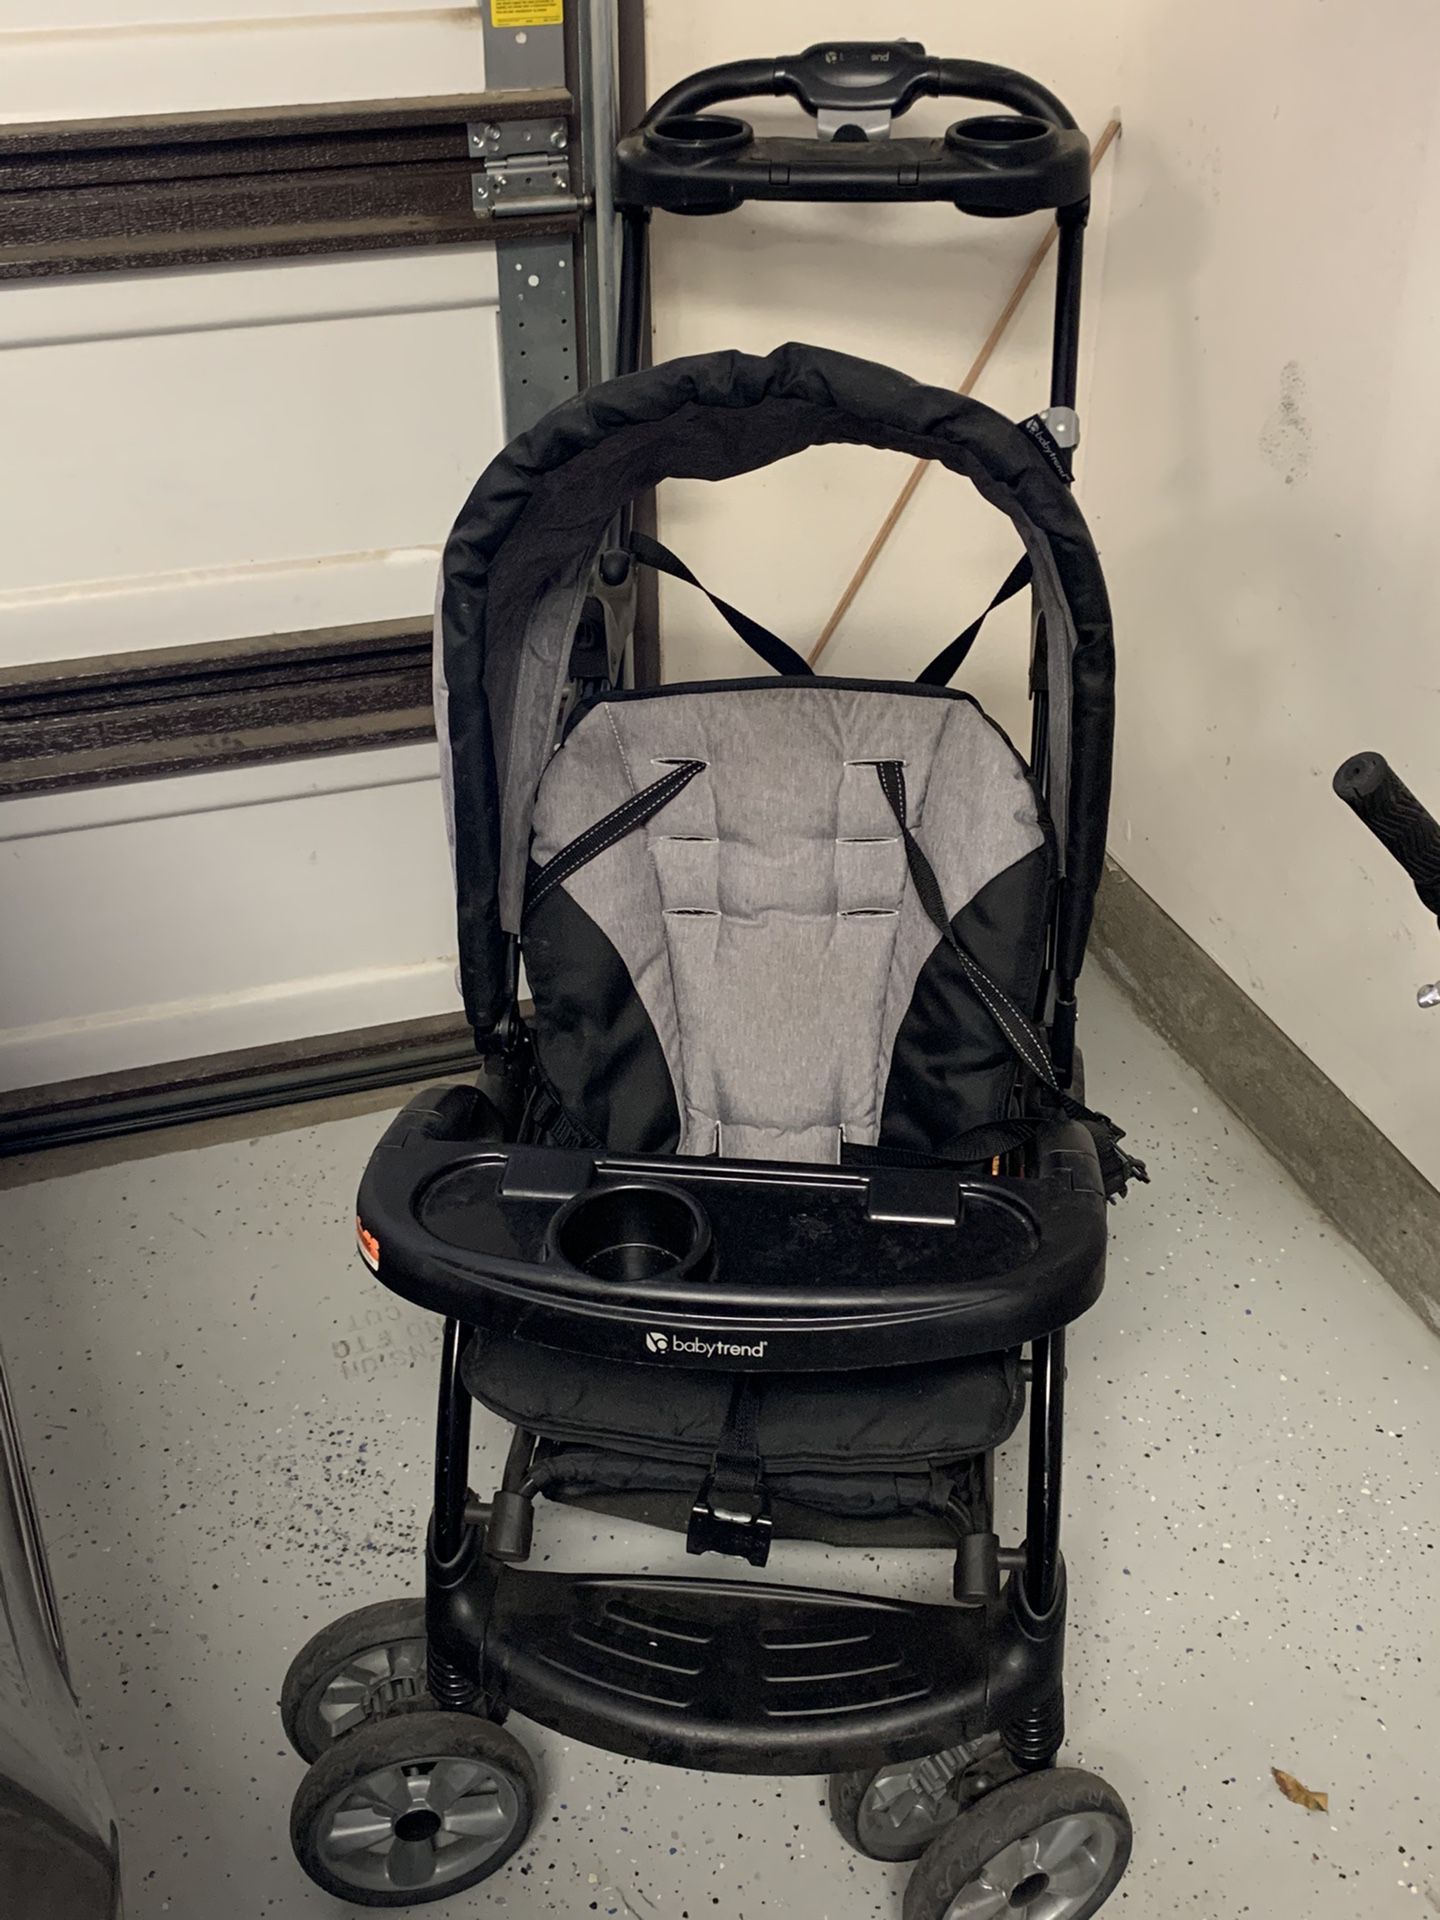 Double stroller Sit and stand stroller for two, can also hold infant car seat